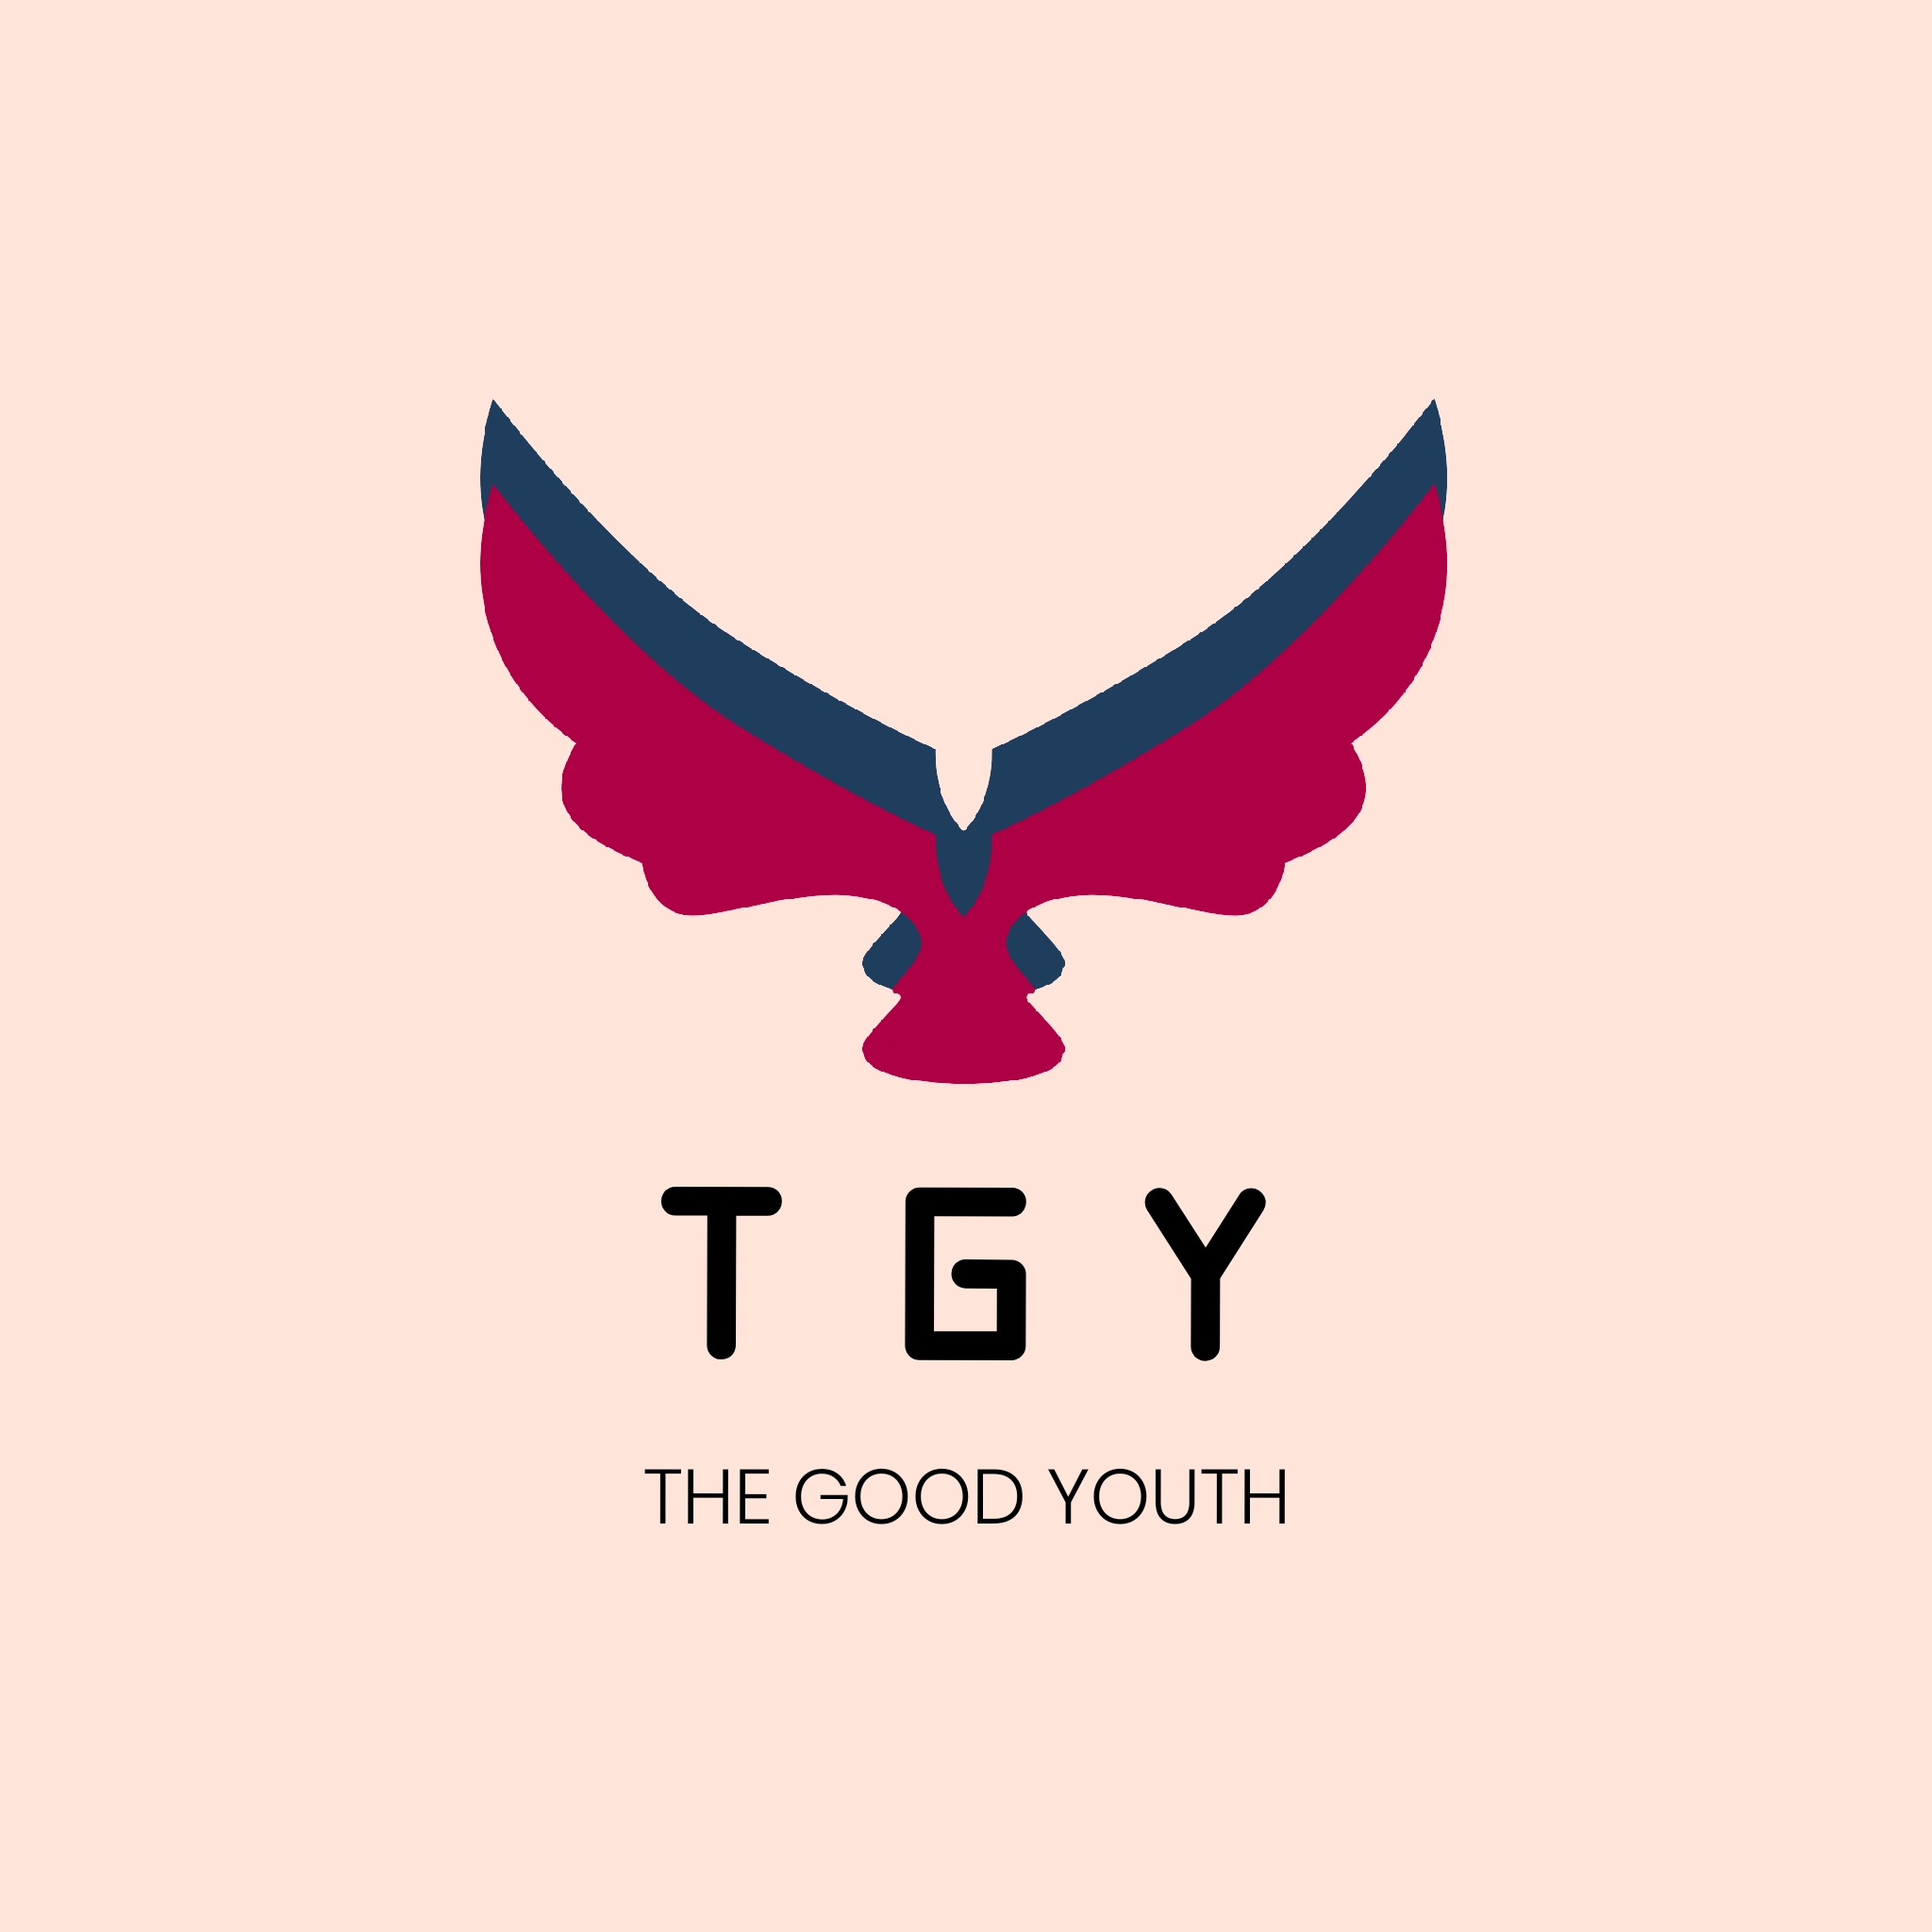 The good youth